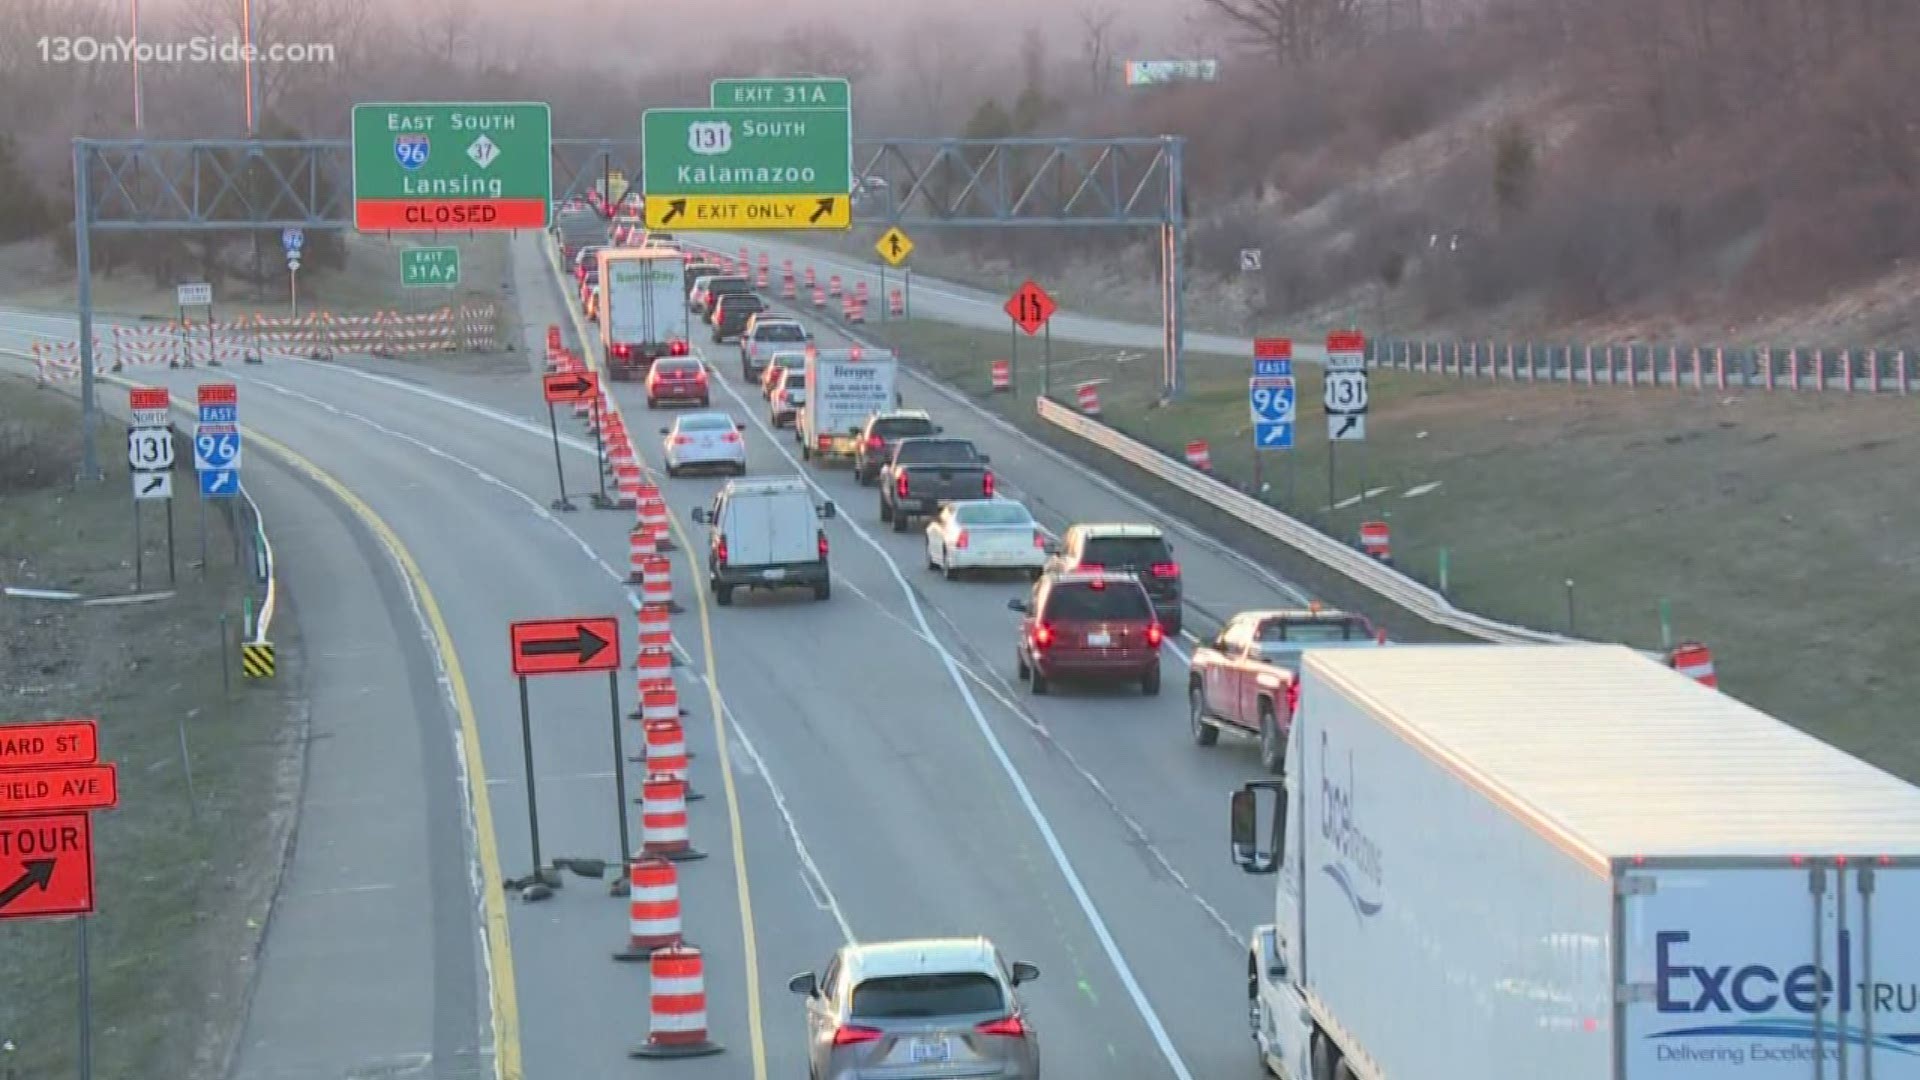 The Michigan Department of Transportation announced Wednesday the ramp from Ionia Avenue to westbound I-196 is now open. MDOT invested $21.4 million to widen and reconstruct the westbound I-196 bridge over the Grand River at the US-131 interchange. The wider bridge will accommodate wider shoulders and additional lanes to better connect westbound I-196 to the US-131 interchange.